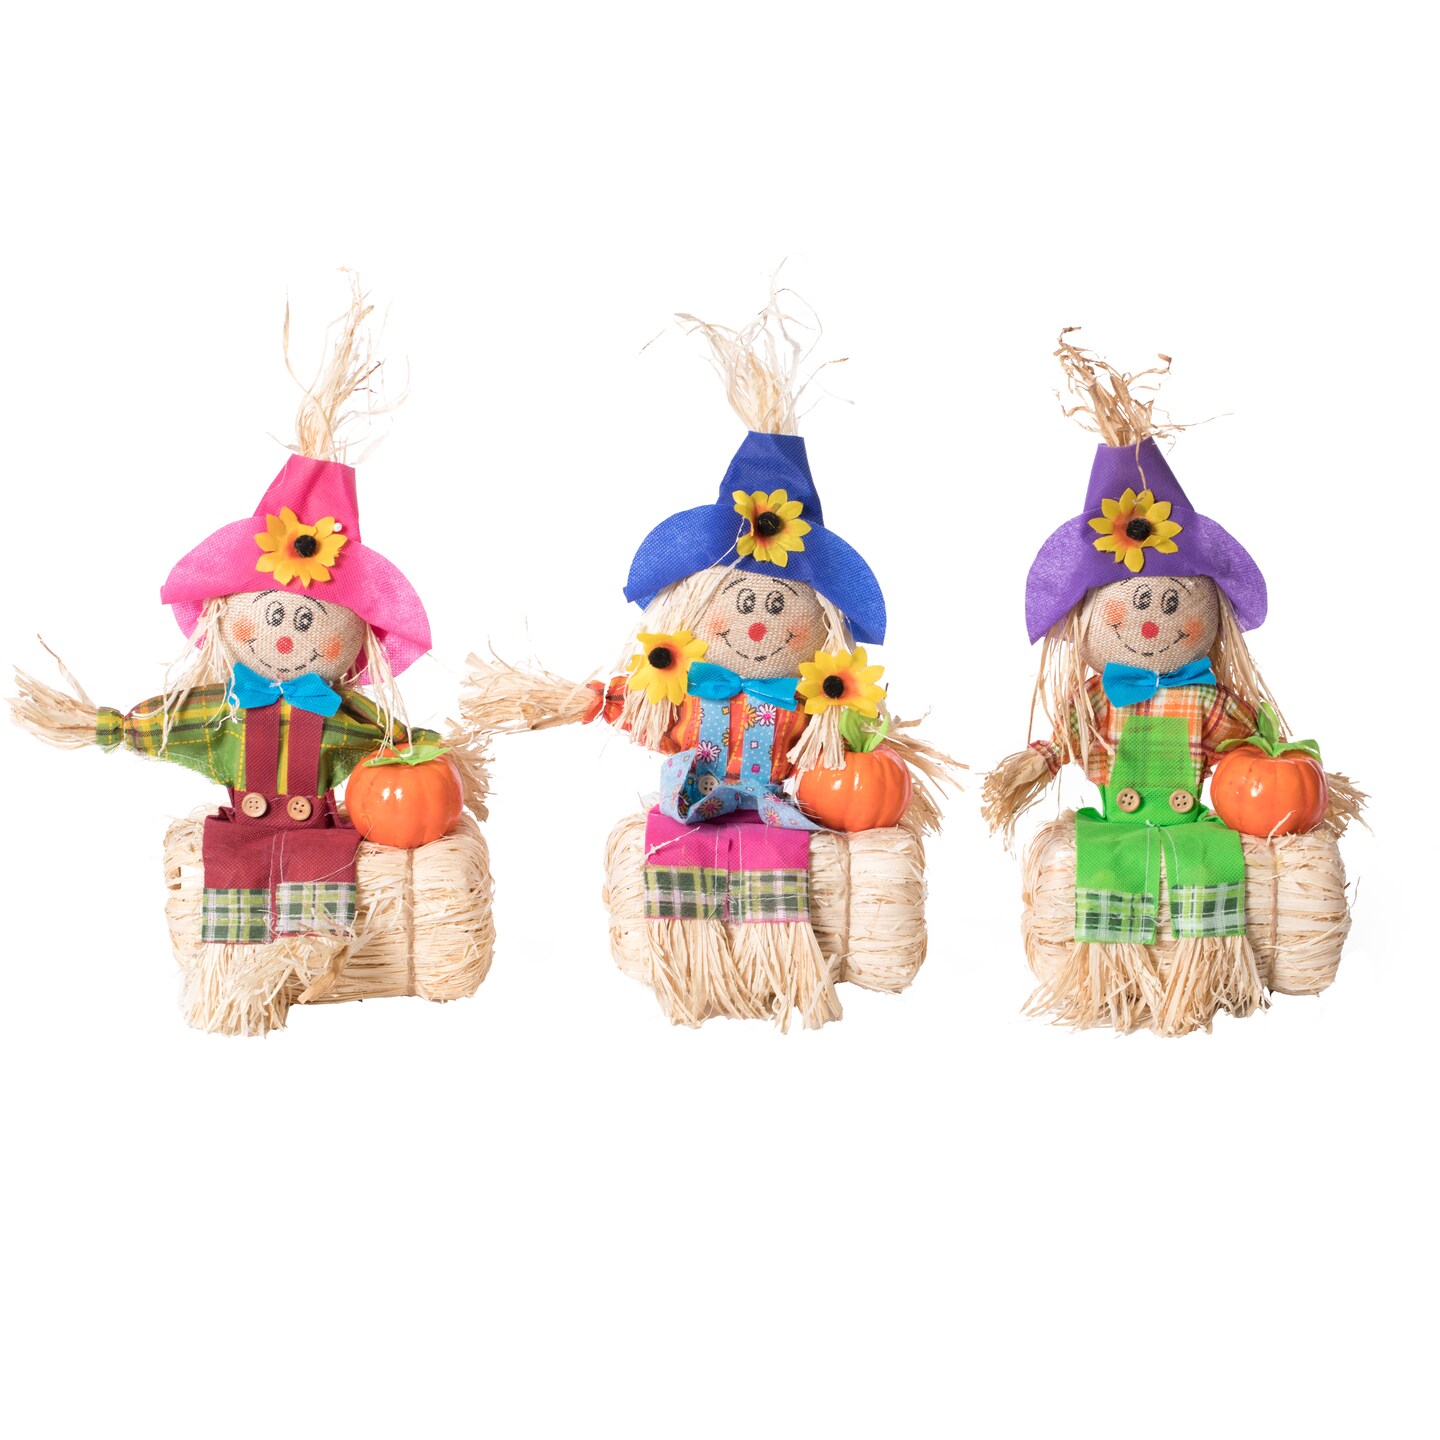 Gardenised 12 Inch Sitting on Straw and Hay Bales Multicolor Trio Scarecrows for Halloween, Fall and All Time Season Garden Decor, Scatter them Around or Gather them Together for a Mesmerizing Display